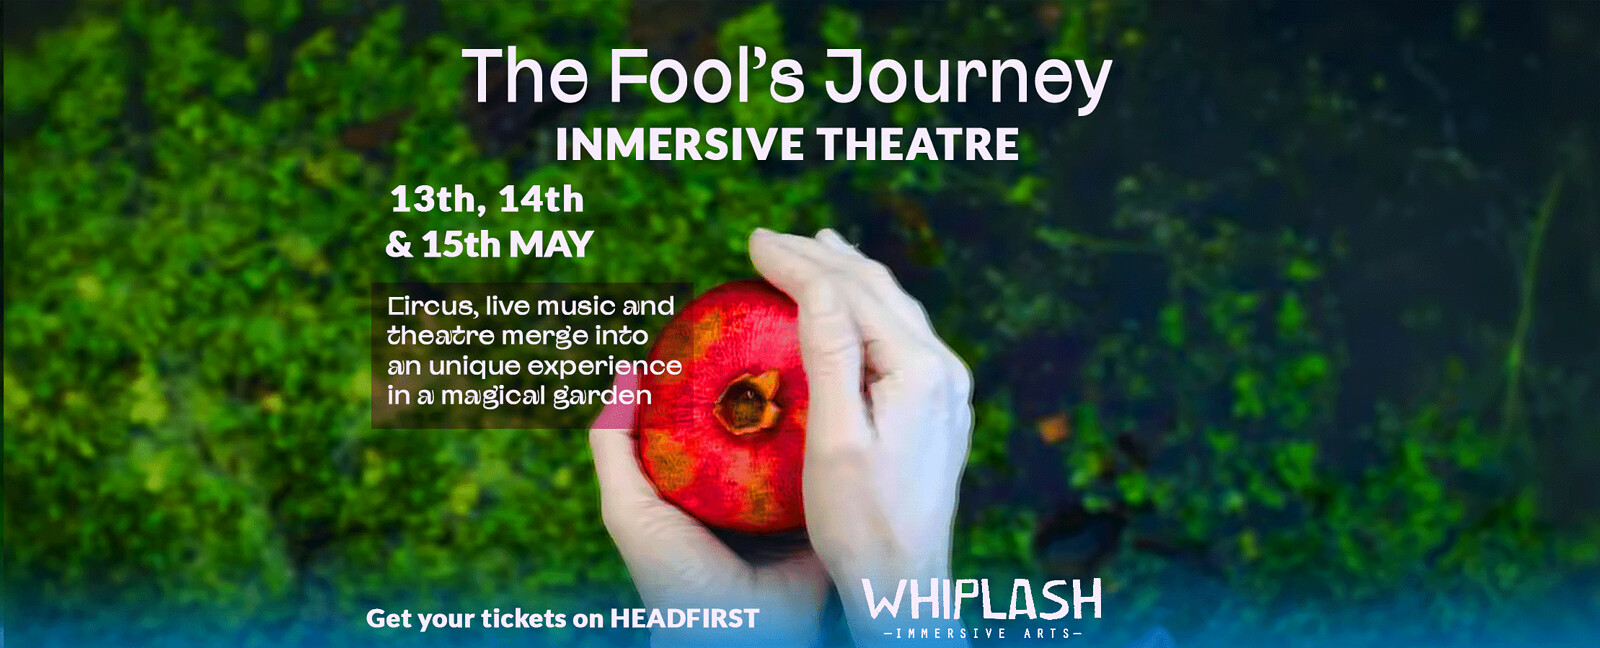 THE FOOL'S JOURNEY IMMERSIVE THEATRE 3:00pm&7:30pm at The walled gardens, Badminton